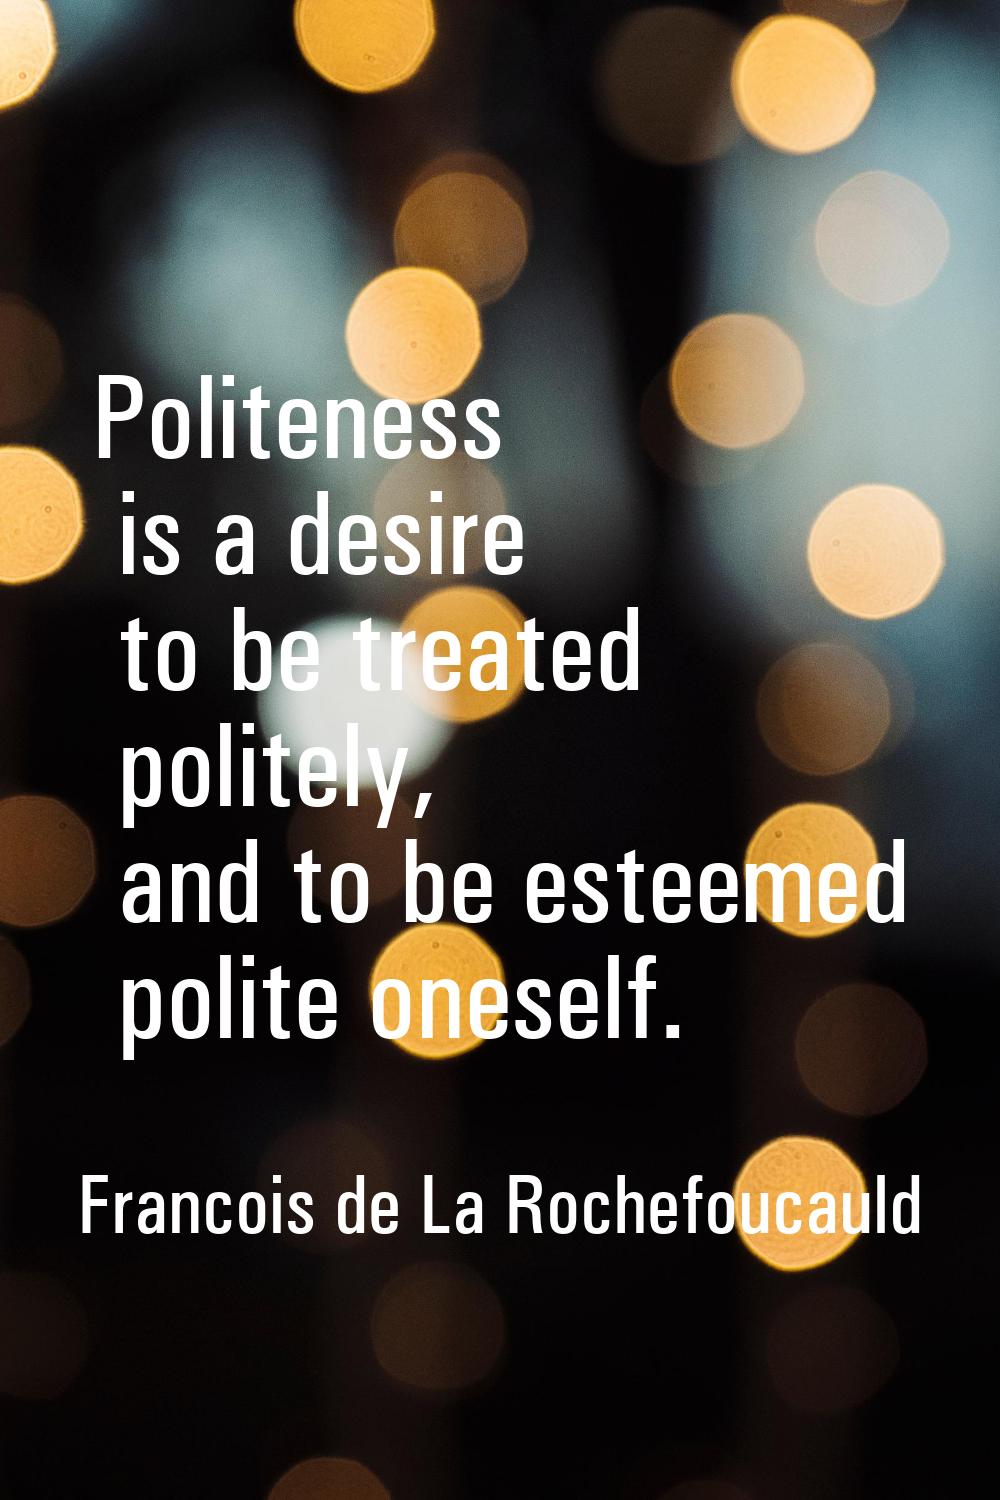 Politeness is a desire to be treated politely, and to be esteemed polite oneself.